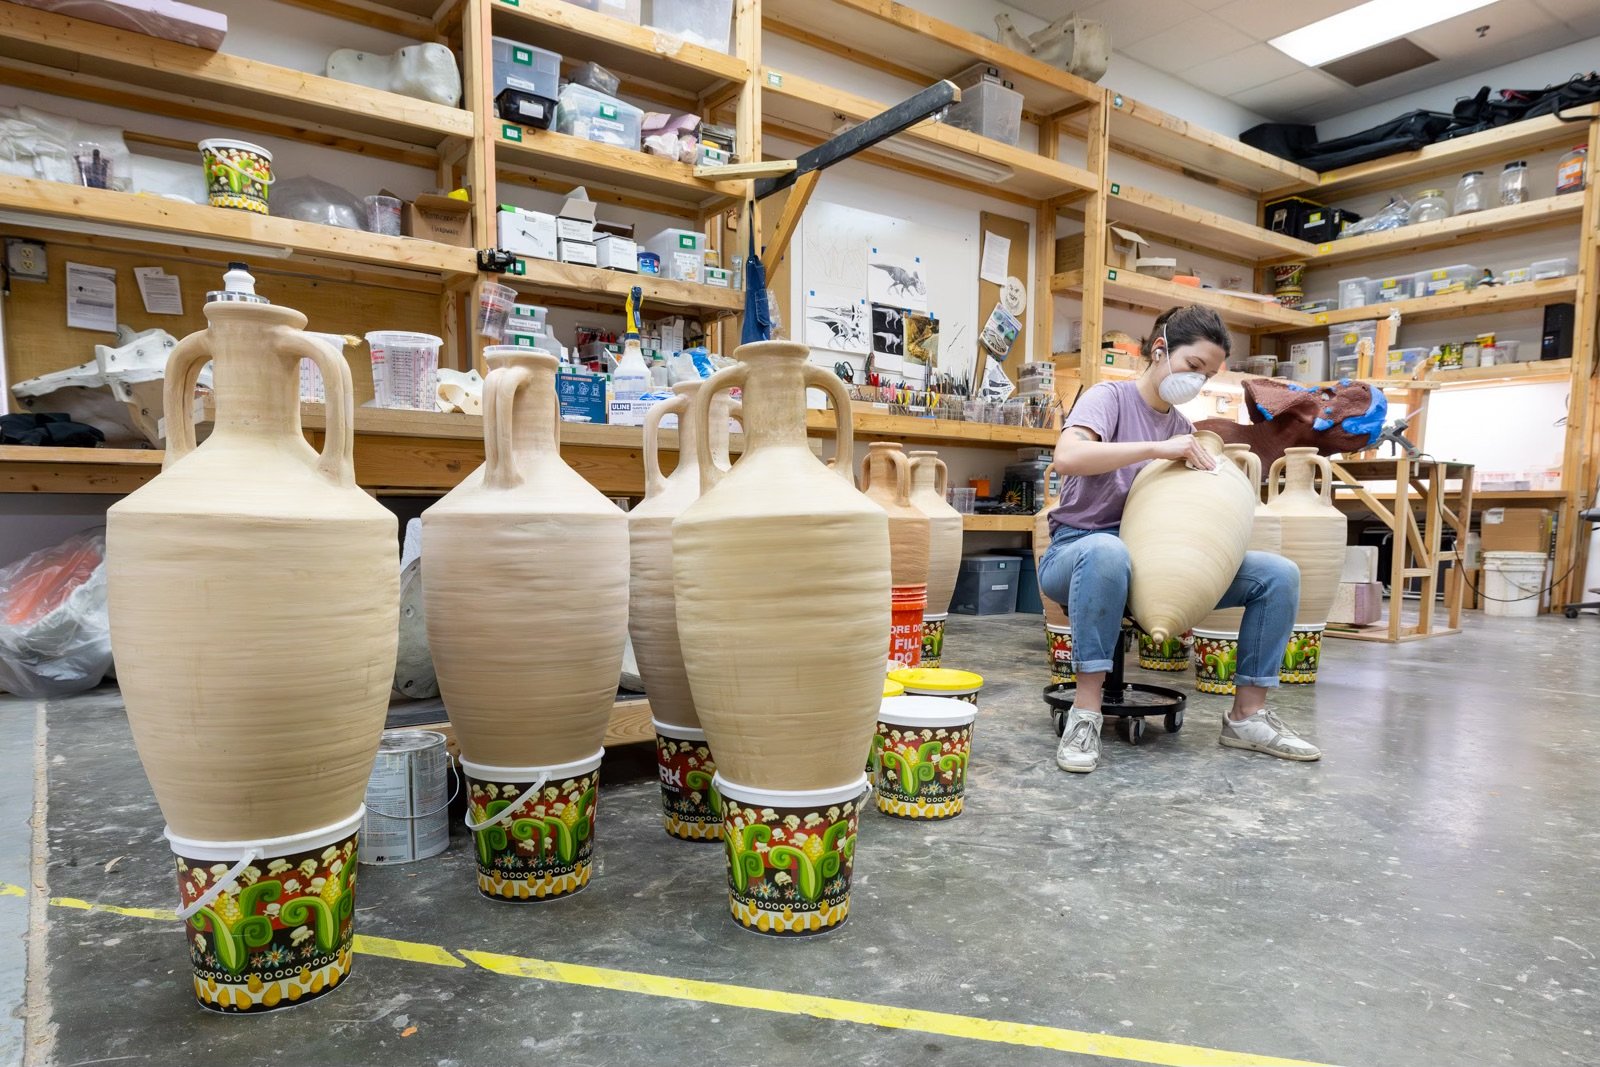 Artist refining the pottery